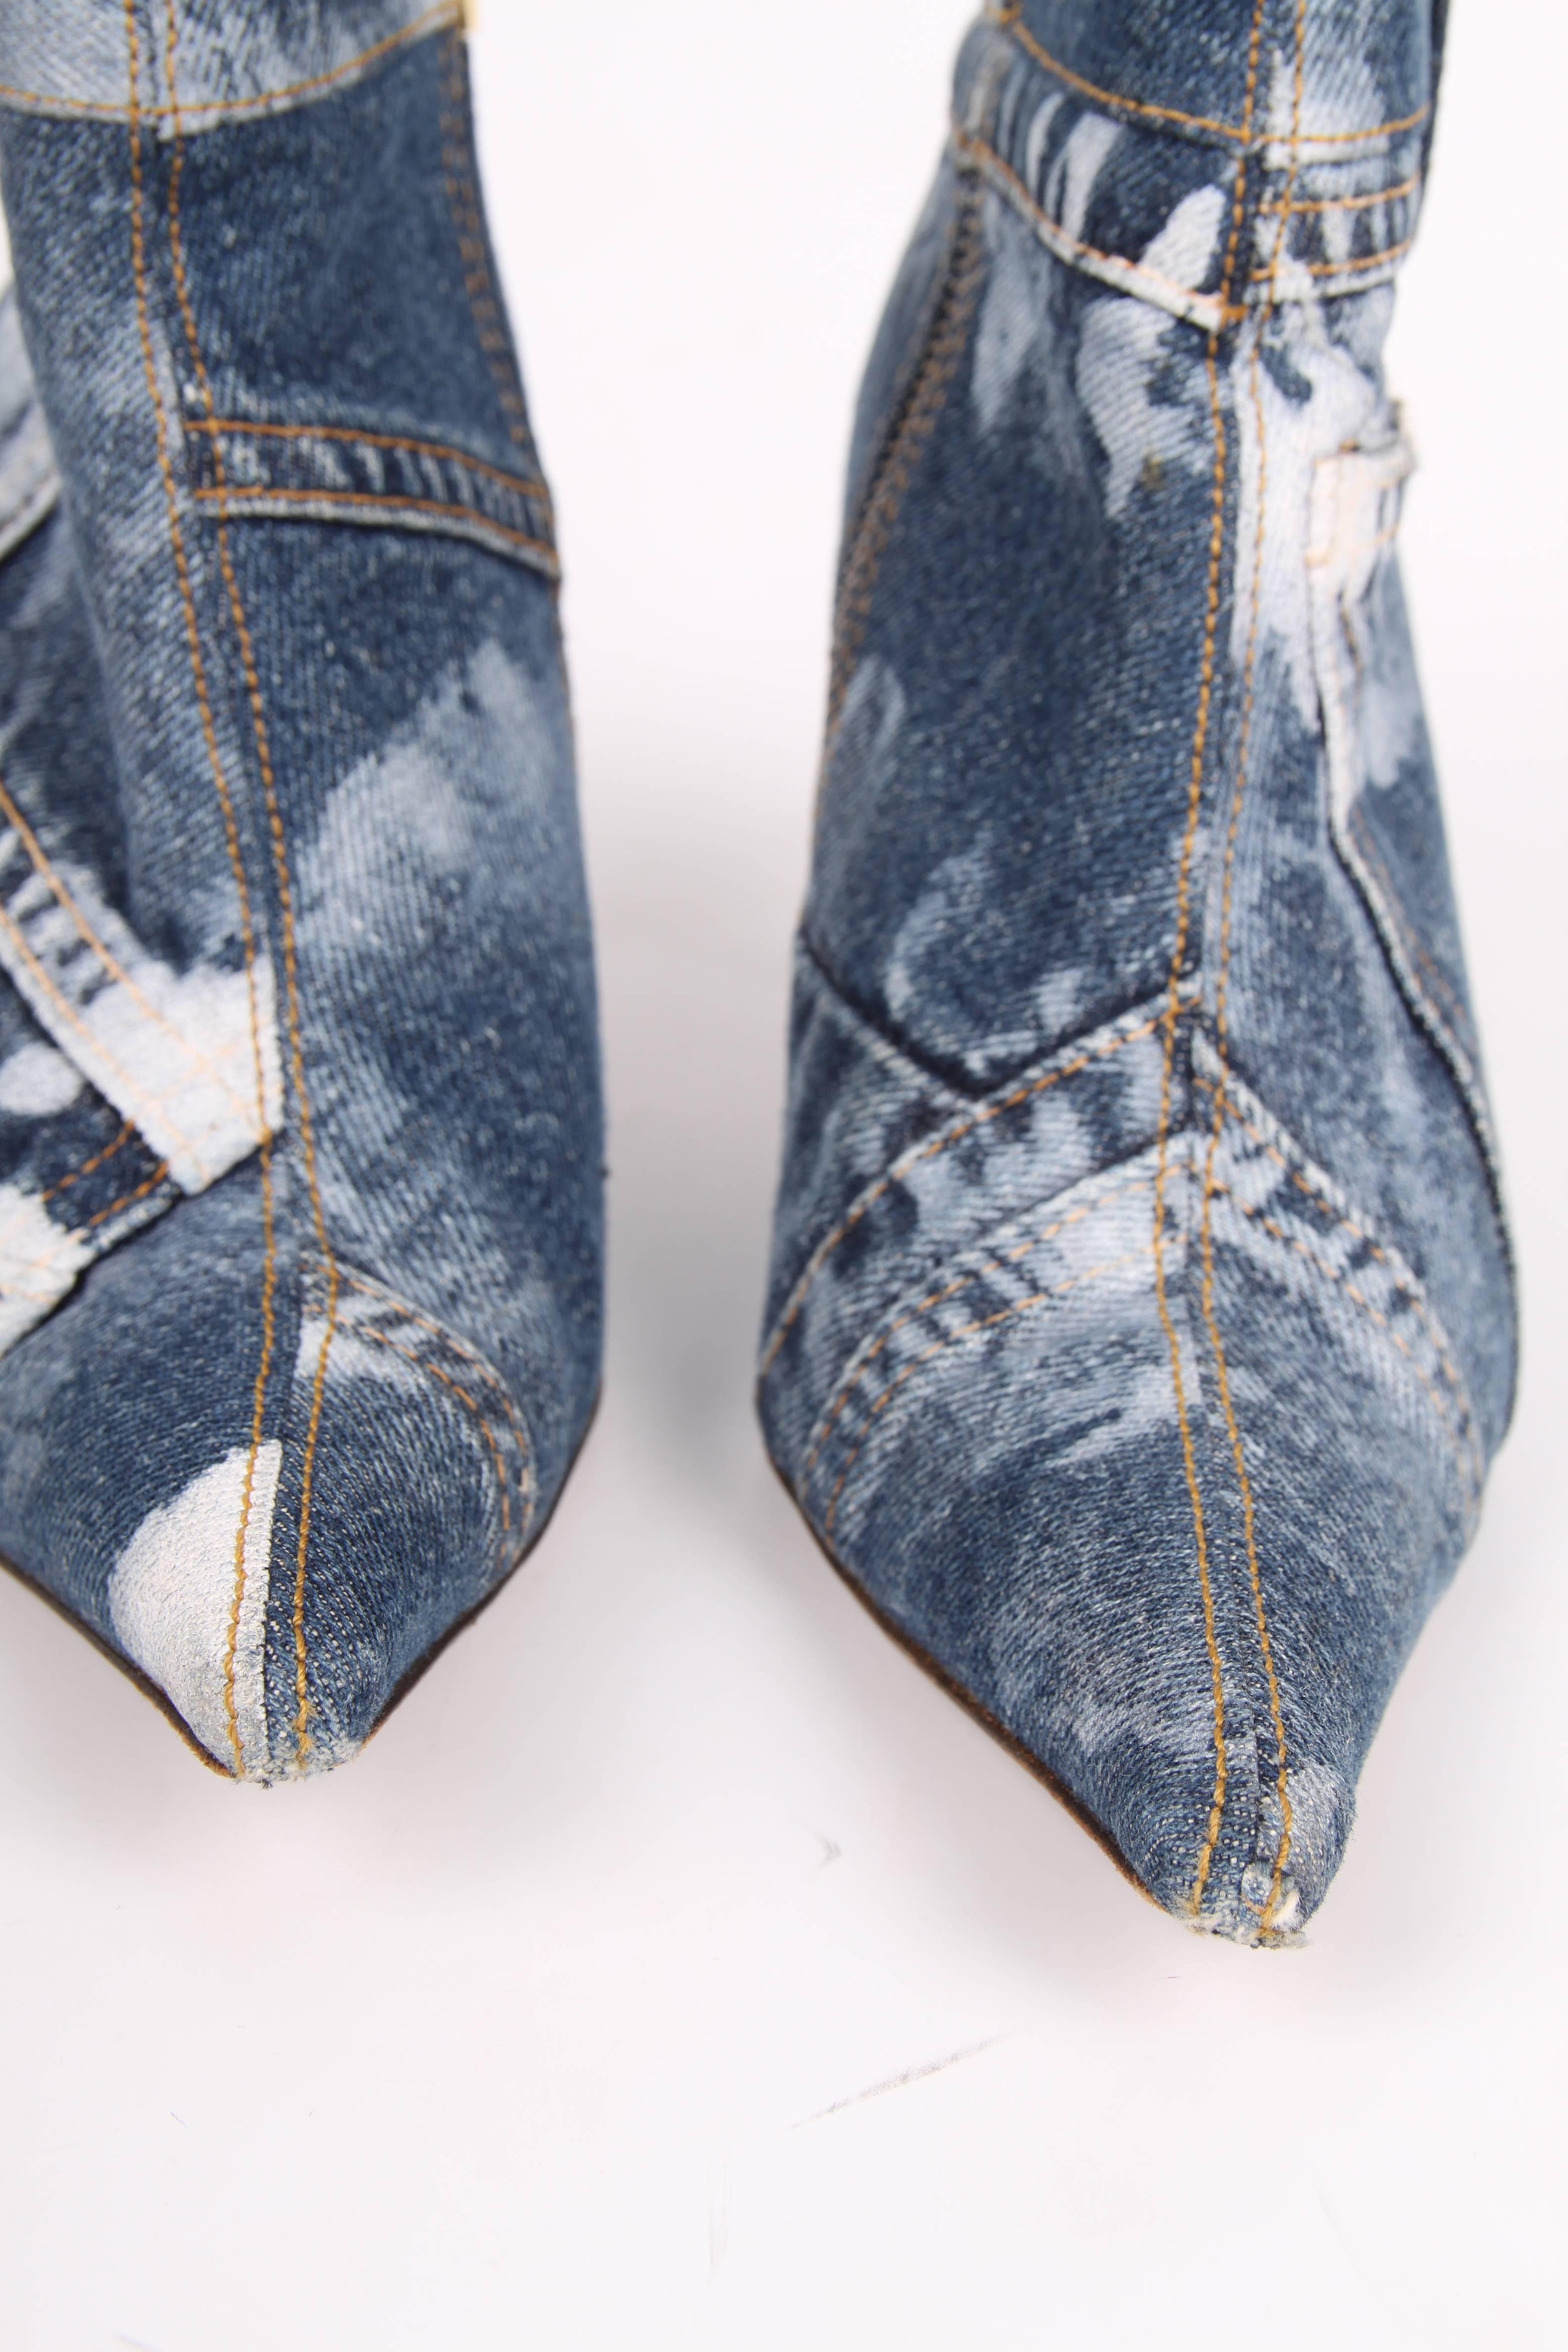 Booties by Dolce & Gabbana in blue denim.  

Closure on the side with a zipper. The heel measures 9 centimeters, no platform. Leather lining with a leopard print. A pointy toe.  

In good condition, 8/10

Size: 38

Made in Italy.